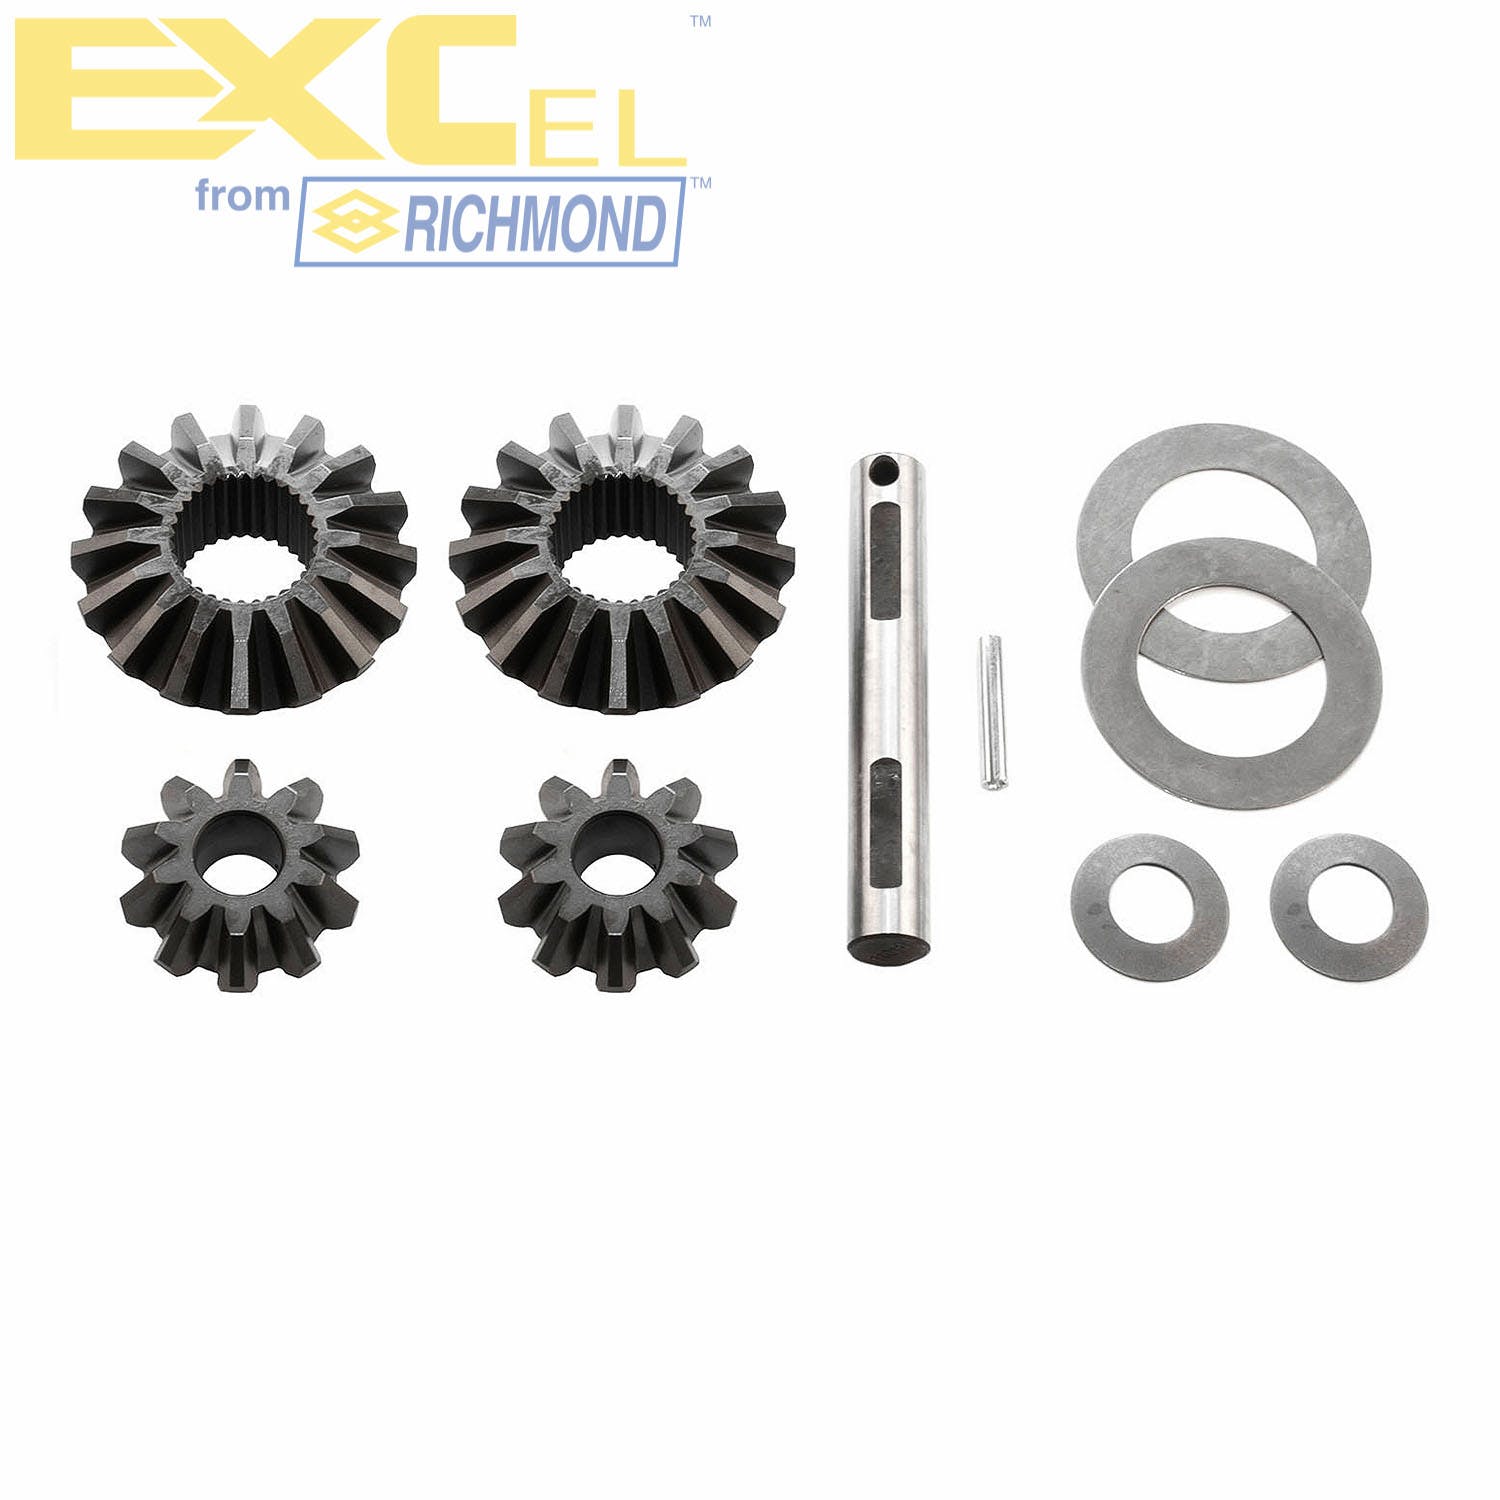 Excel XL-4018 Differential Carrier Gear Kit